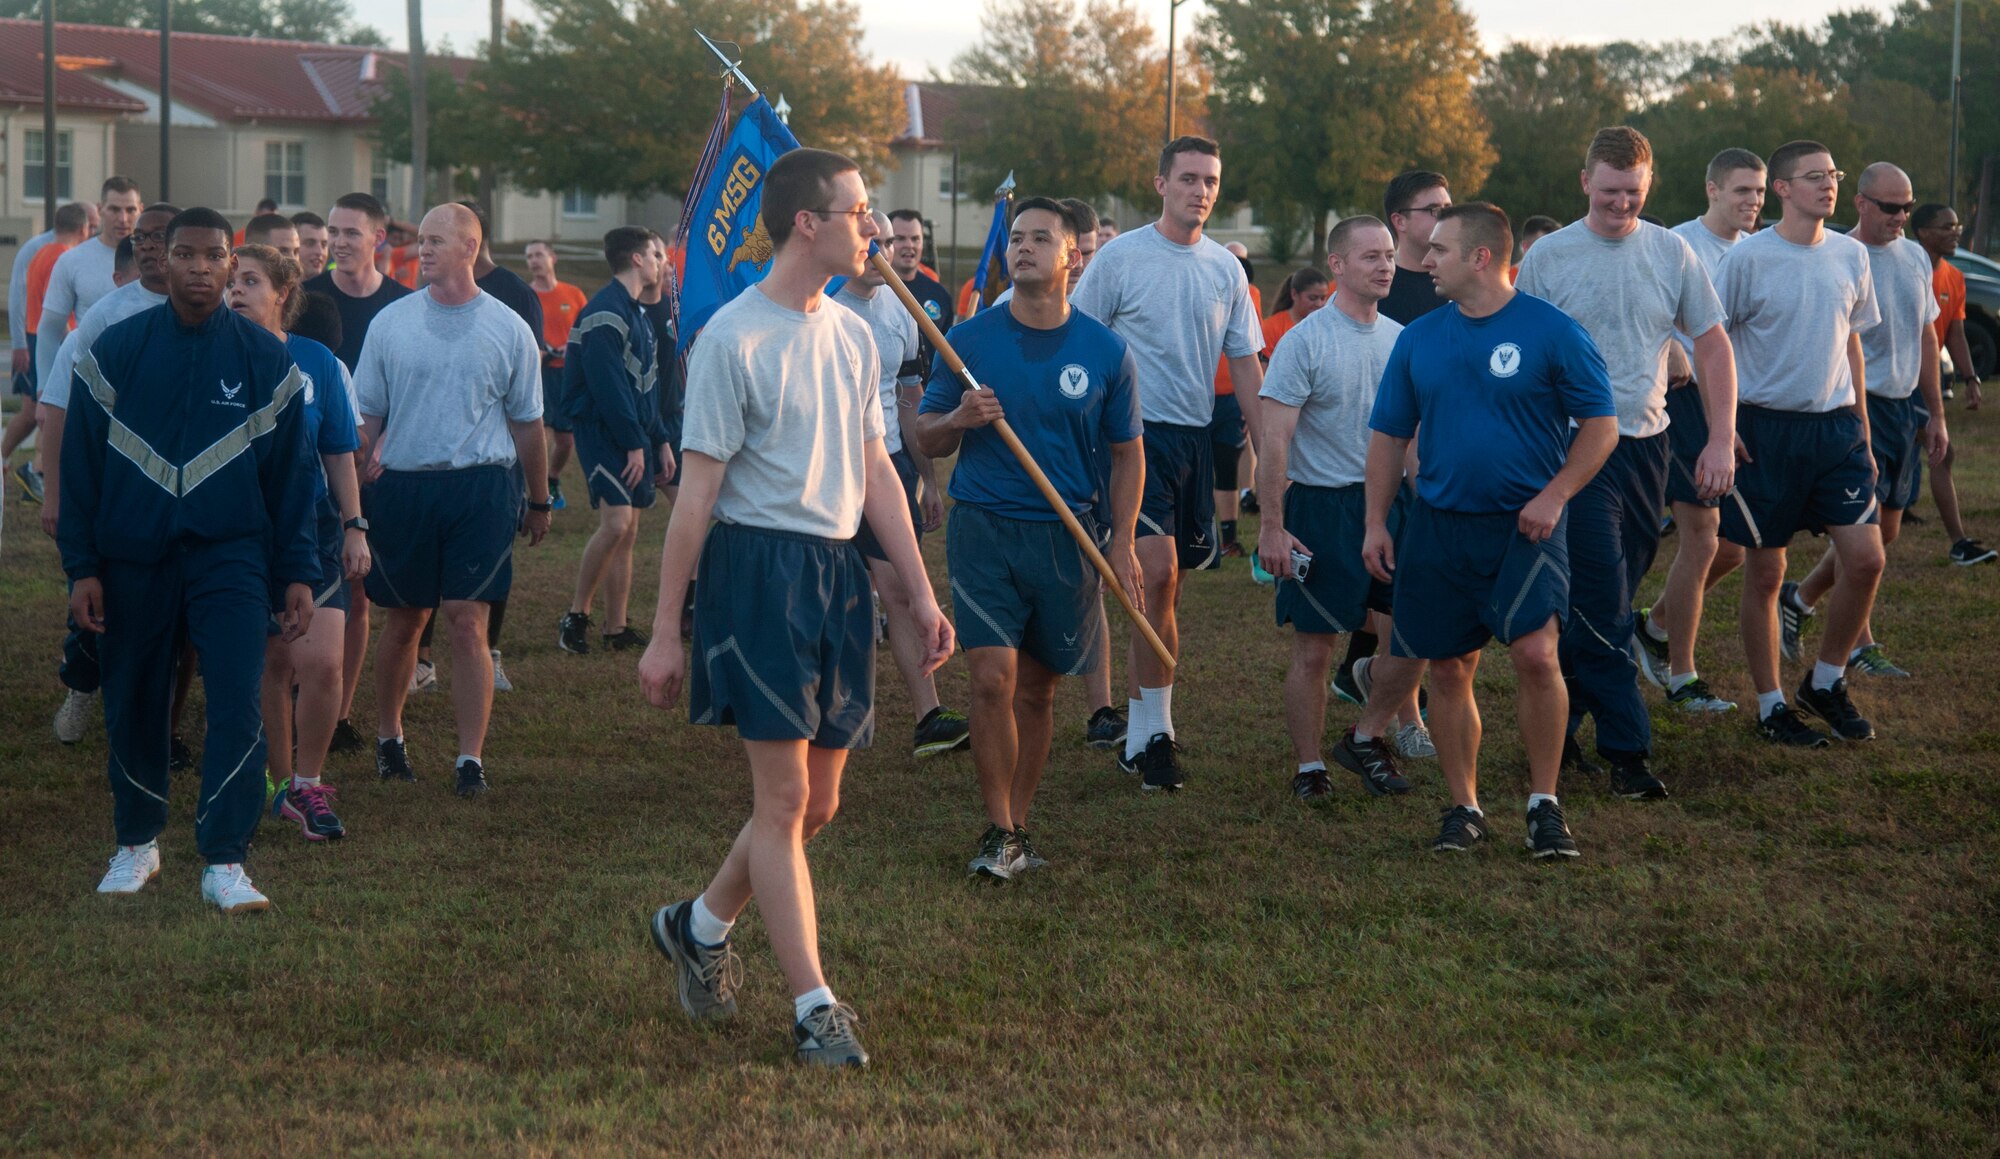 Members of MacDill Air Force Base are dismissed from formation in order to hydrate and rest after the 5k formation run at MacDill Air Force Base, Fla., Jan. 13, 2017. After the run, Airmen were given drinks and a quick break prior to the weight lifting competition. (U.S. Air Force photo by Airman 1st Class Rito Smith) 